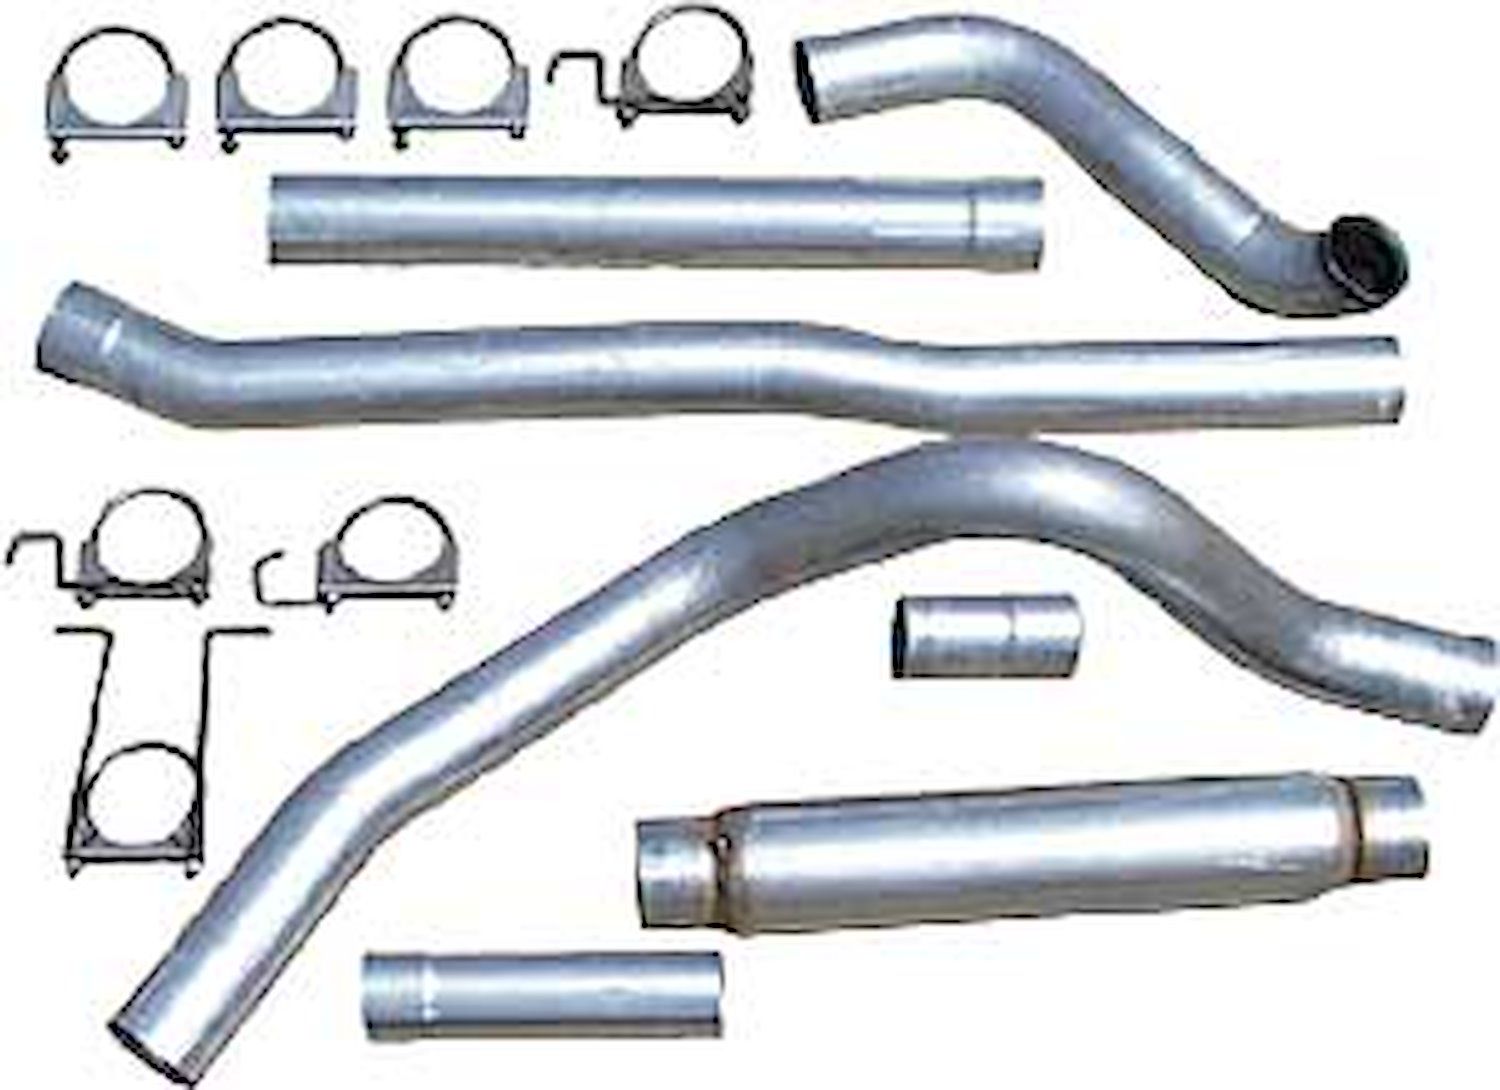 1999-2004 Ford 1/2, 3/4 & 1 Ton Pick-Up Turbo Diesel Turbo-Back Exhaust System 7.3L Diesel w/out Converter